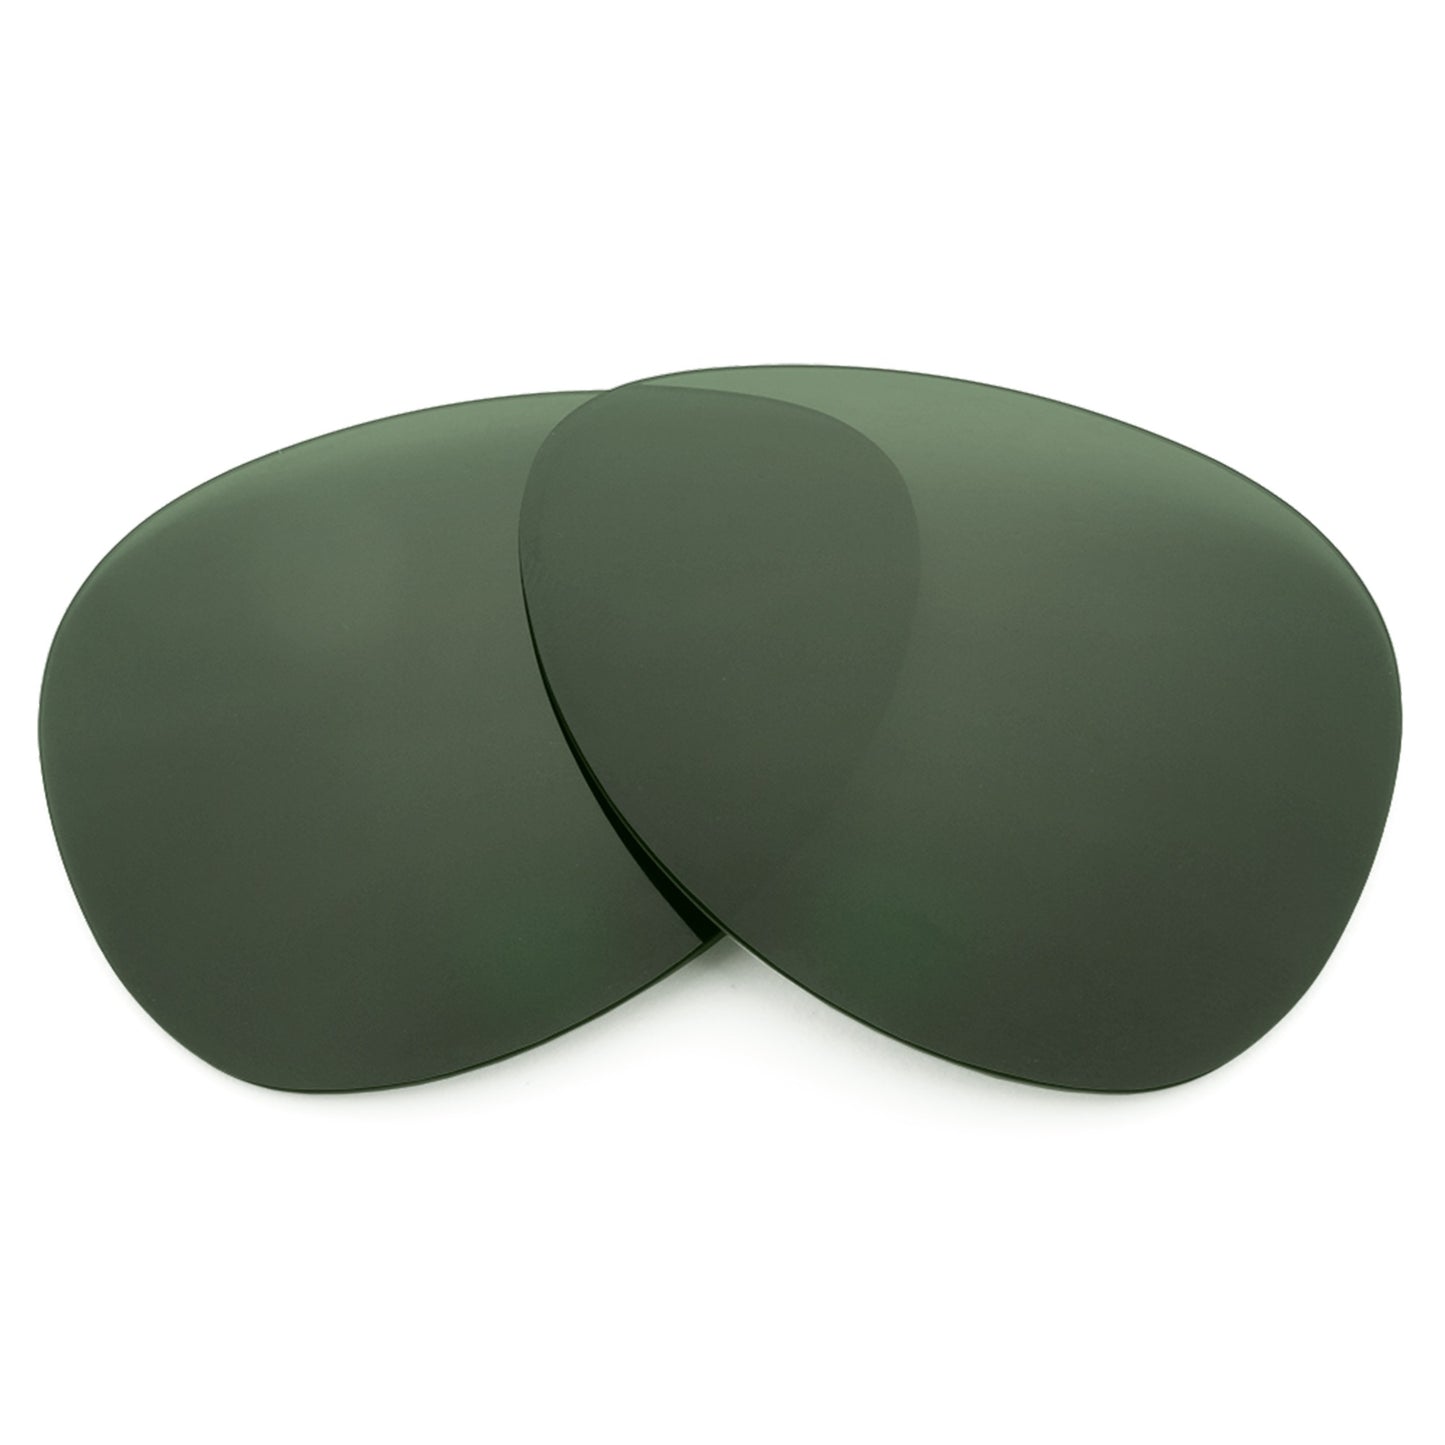 Revant replacement lenses for Ray-Ban Vagabond RB4152 53mm Non-Polarized Gray Green